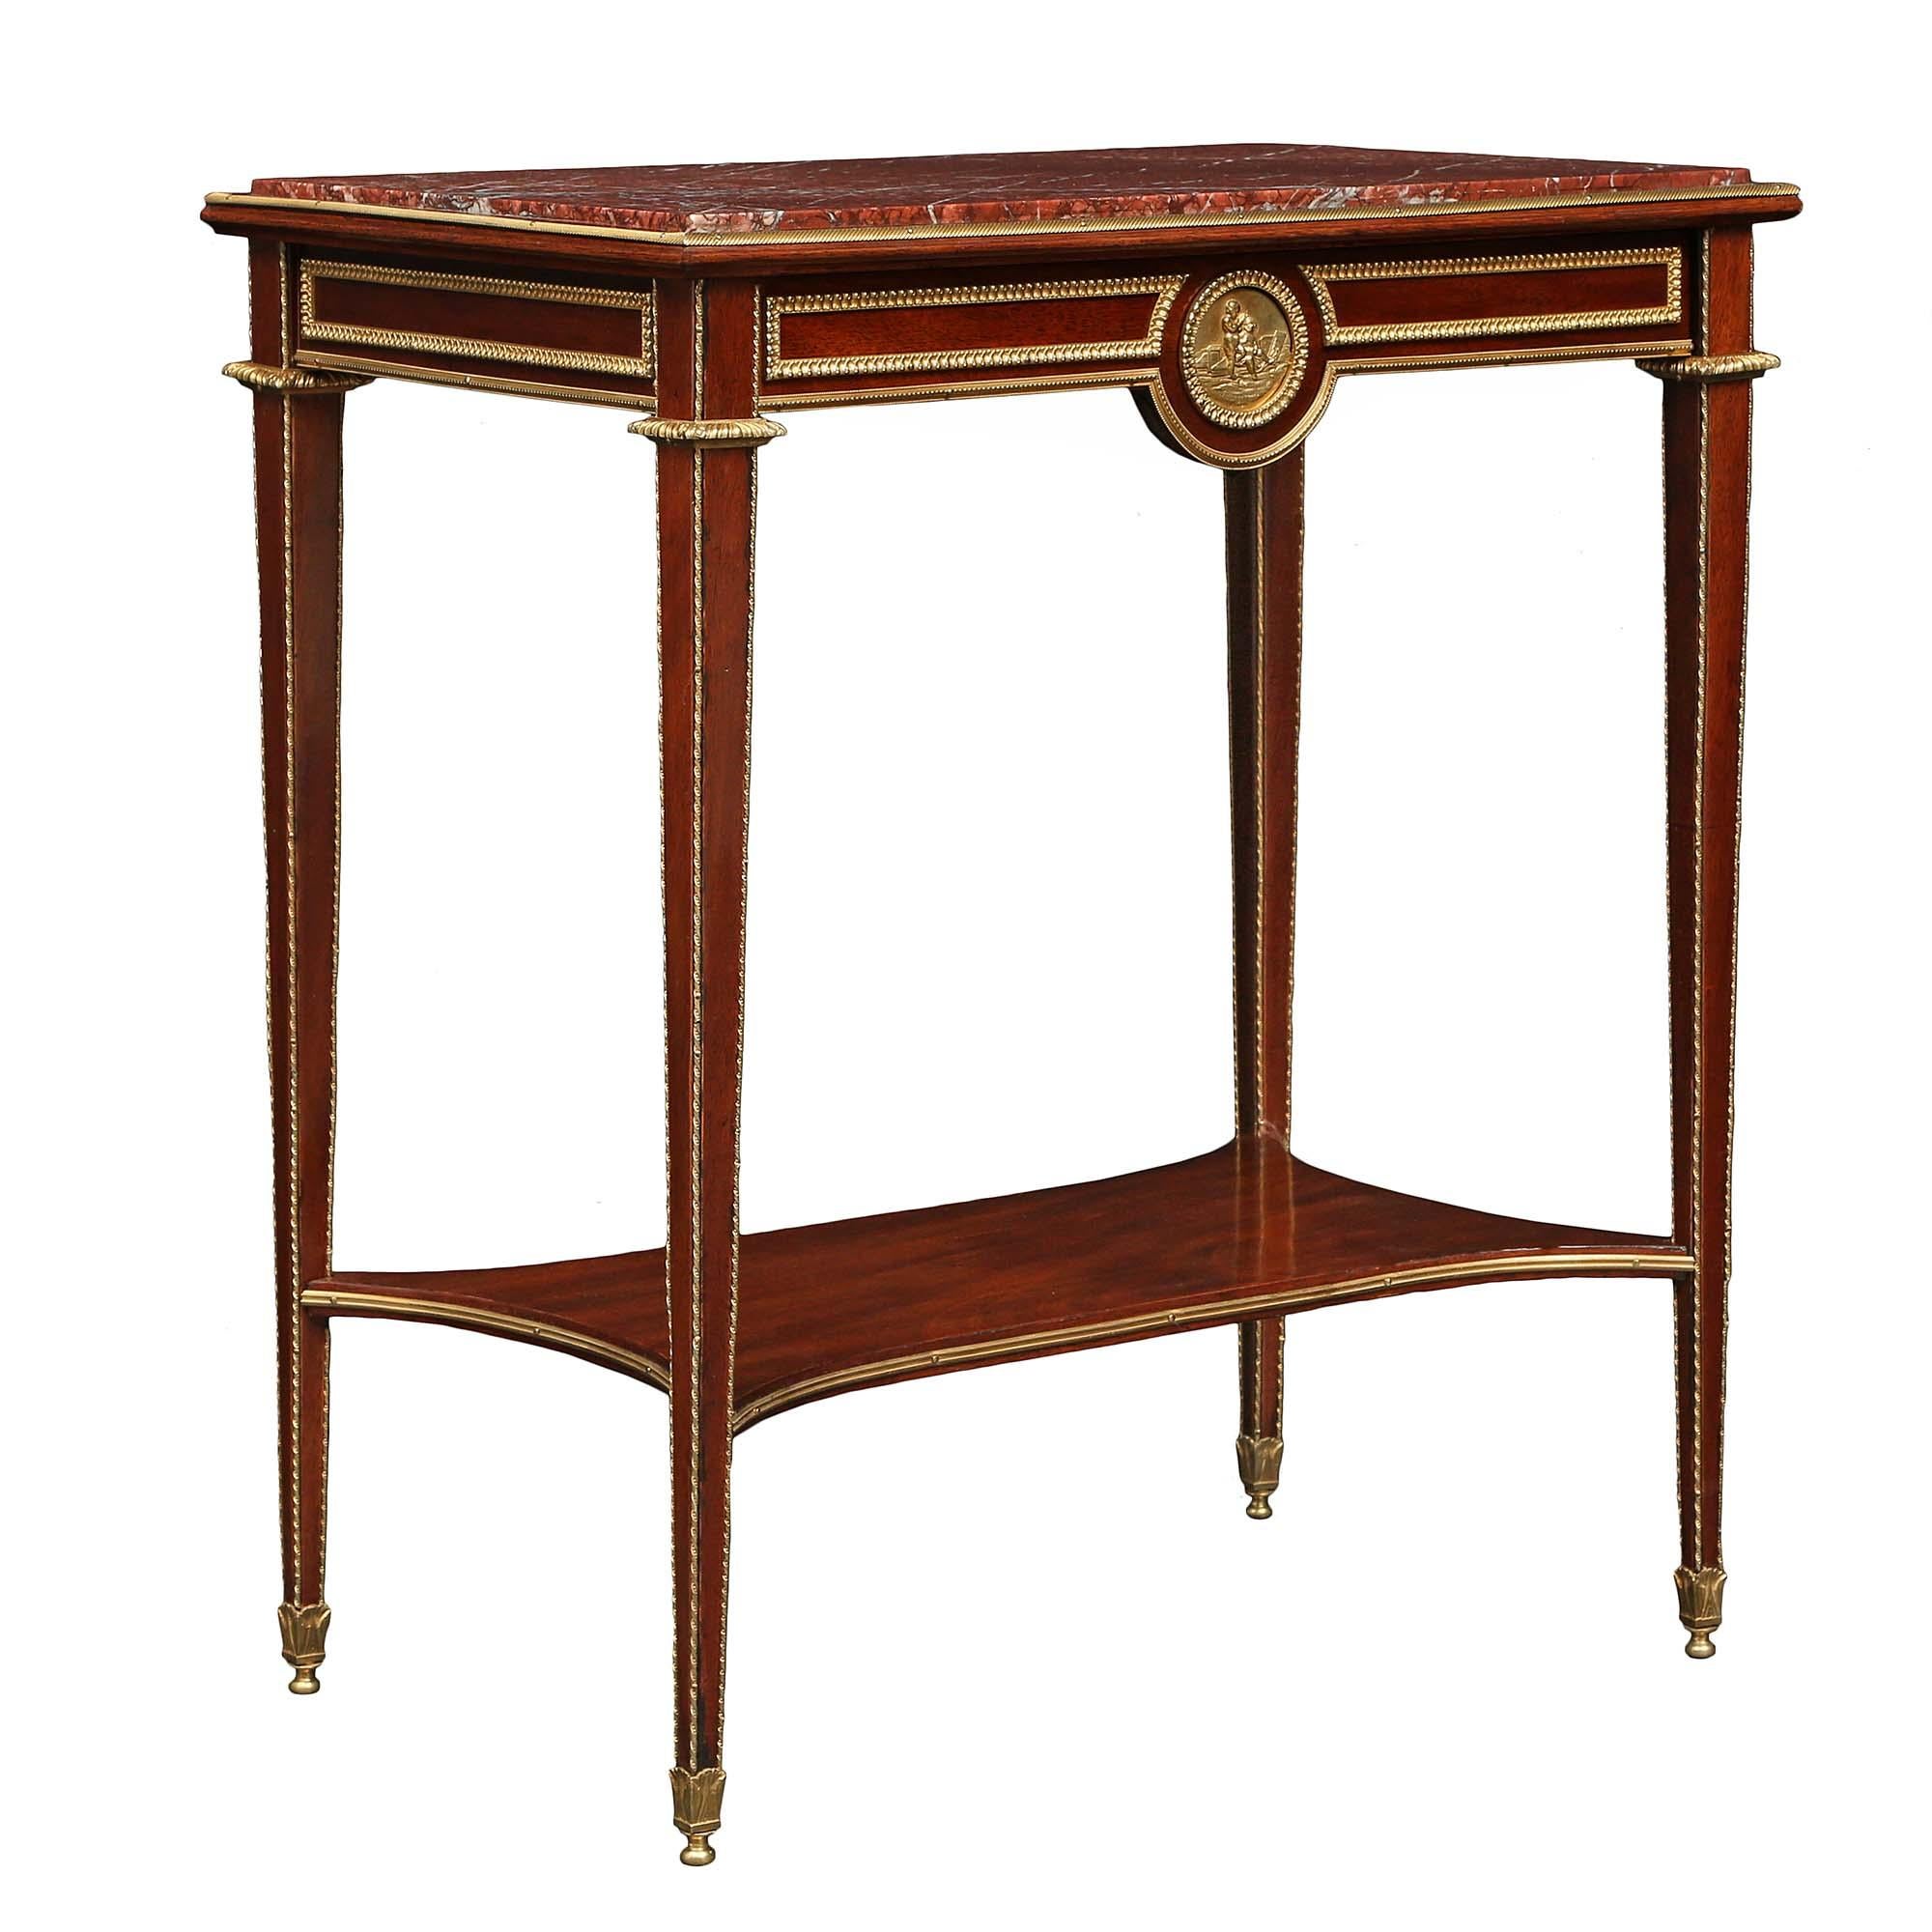 A very handsome French mid 19th century Louis XVI st. mahogany rectangular side table. The table is raised on slender tapered legs with twisted ormolu trim top mount and sabots. The legs are joined by a bottom tier with concave sides and ormolu